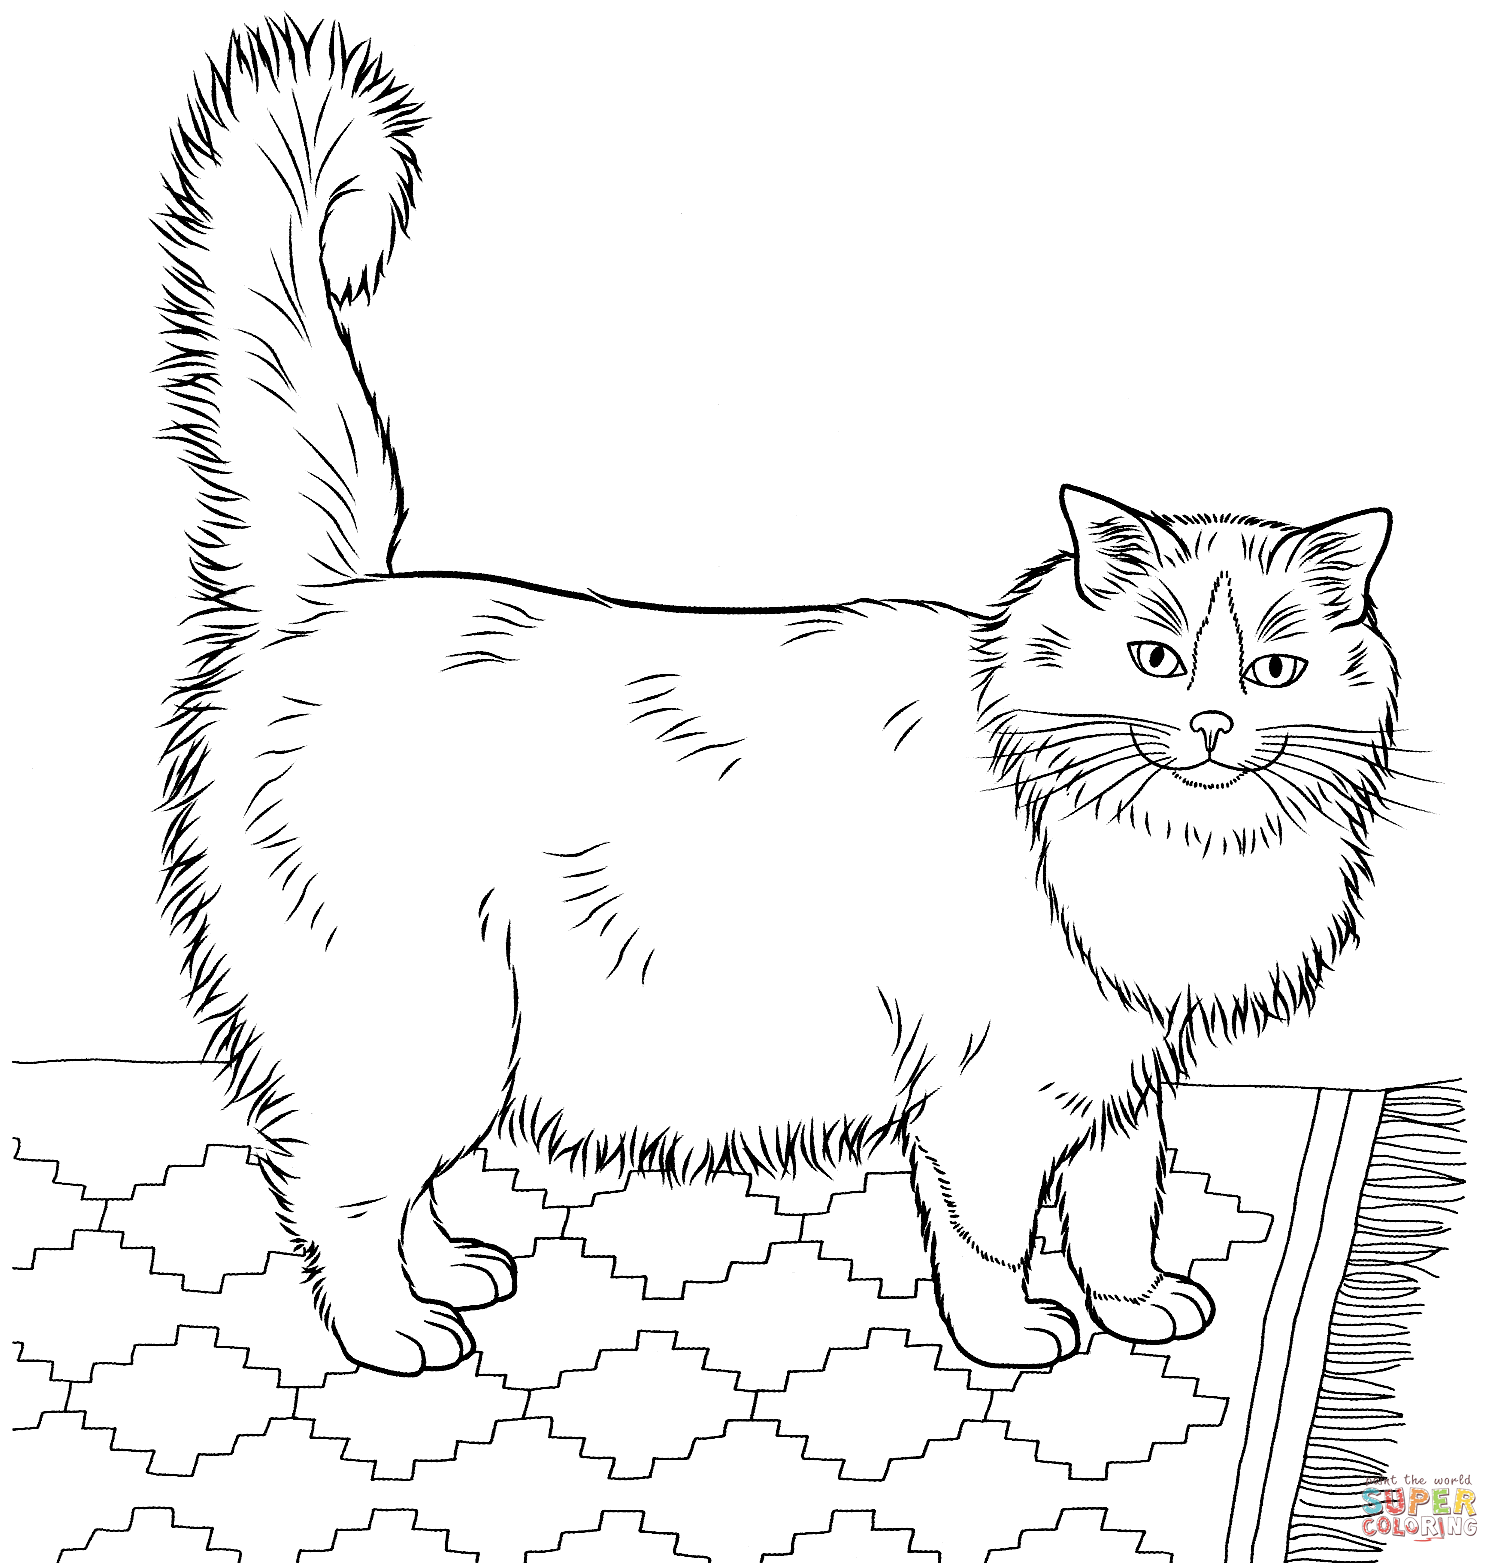 Ragdoll Cat Coloring Page | Free Printable Coloring Pages - Coloring Home